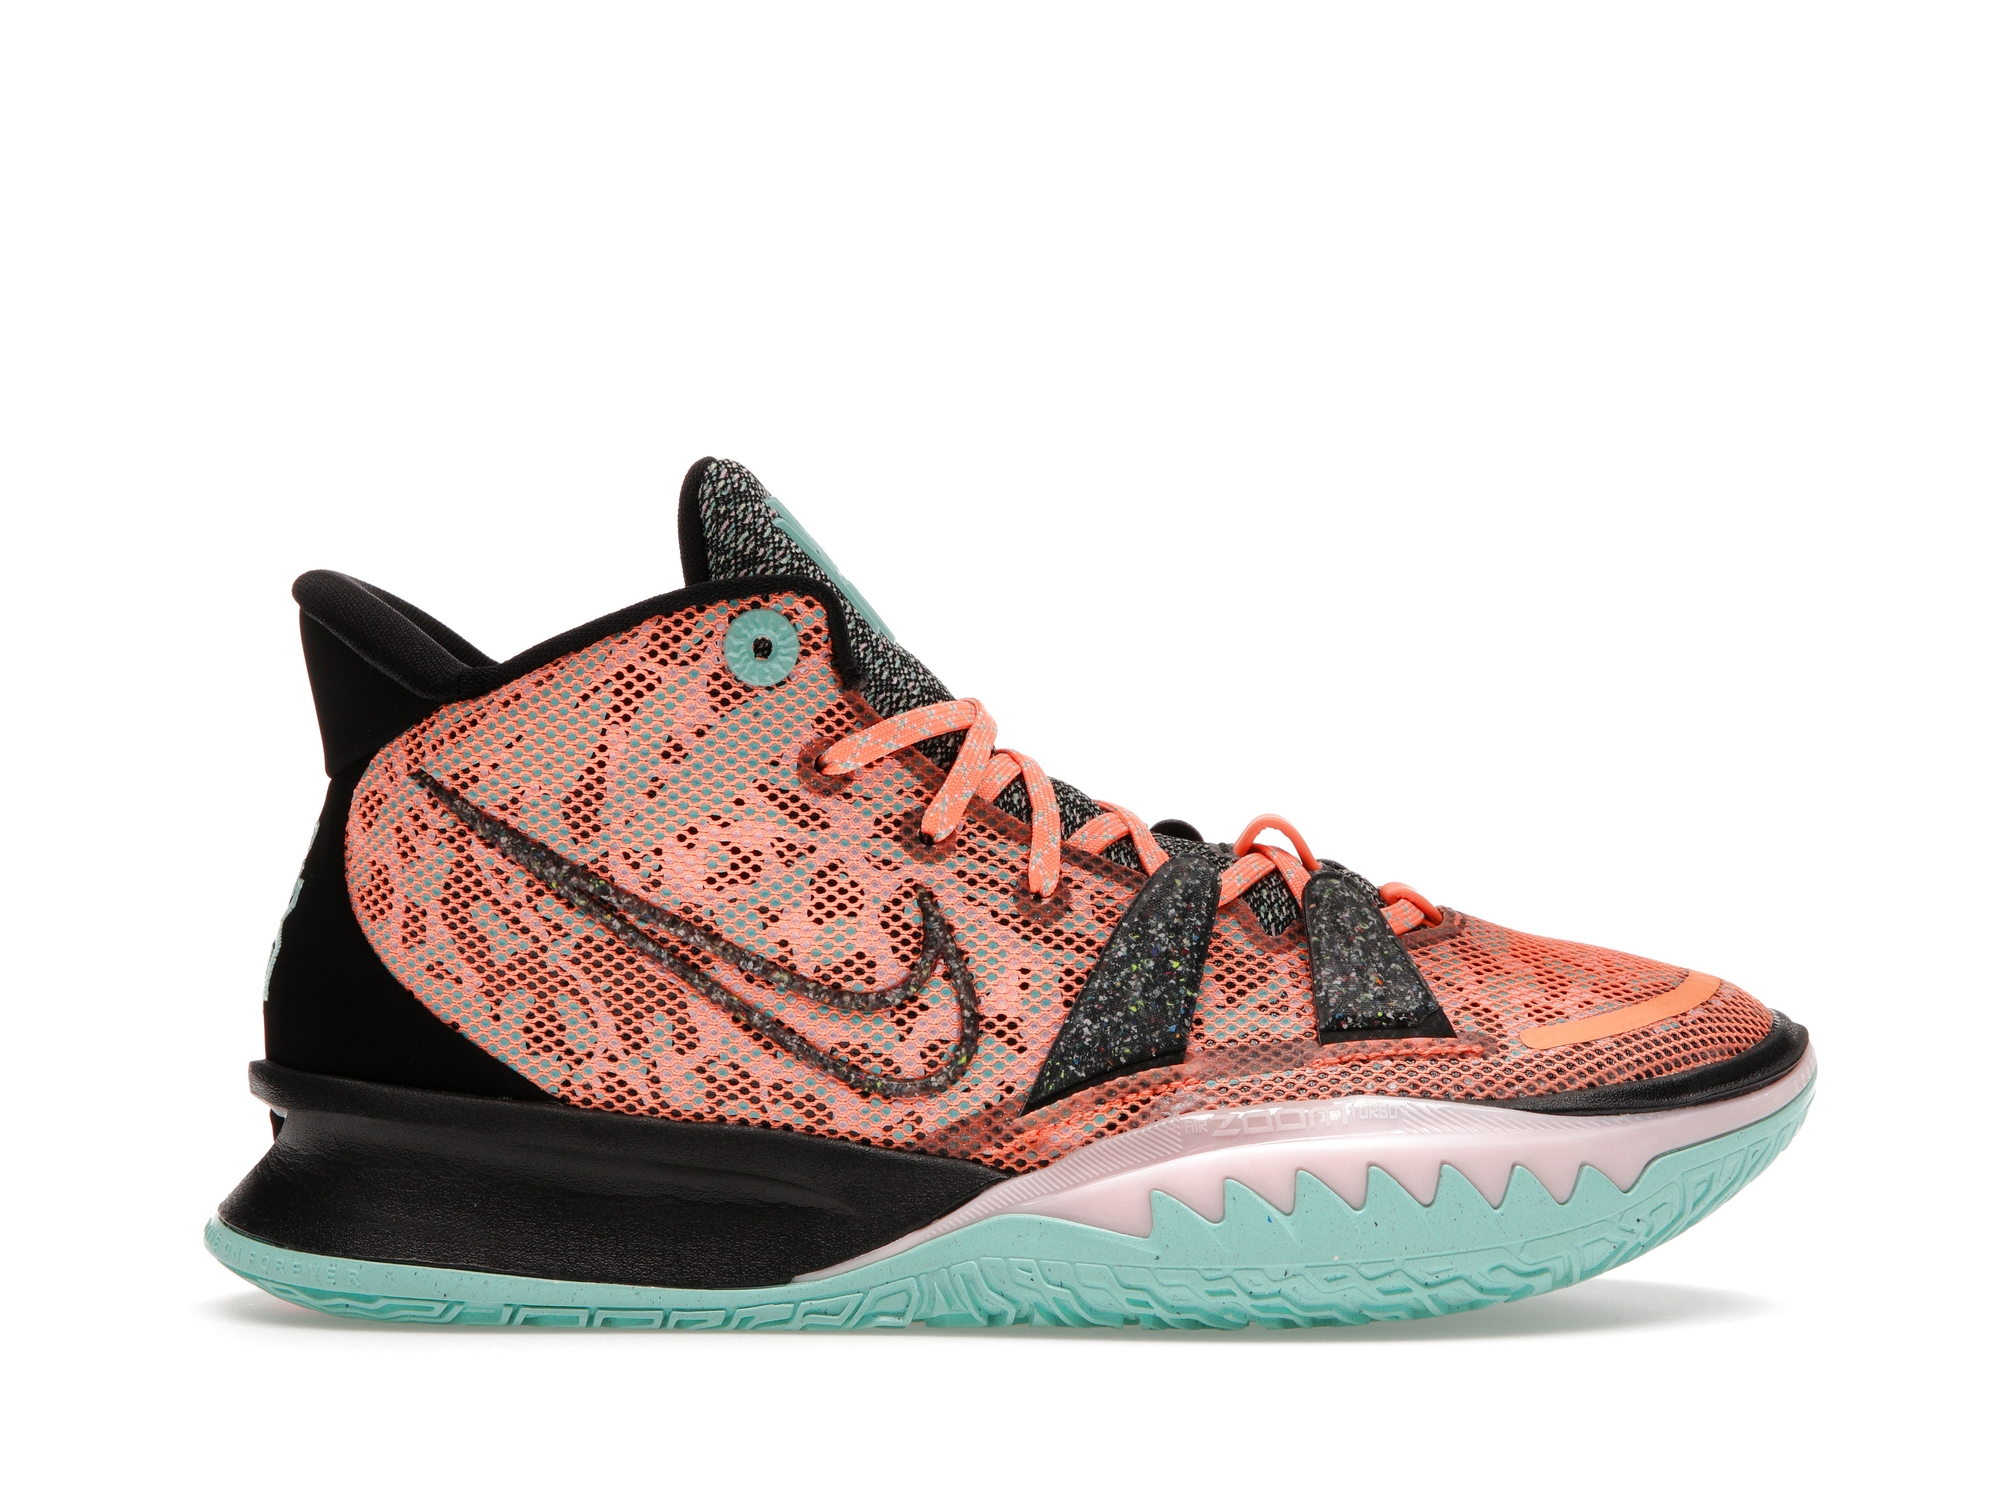 Nike Kyrie 7 Play for the Future Men's - DD1447-800/DD1446-800 - US